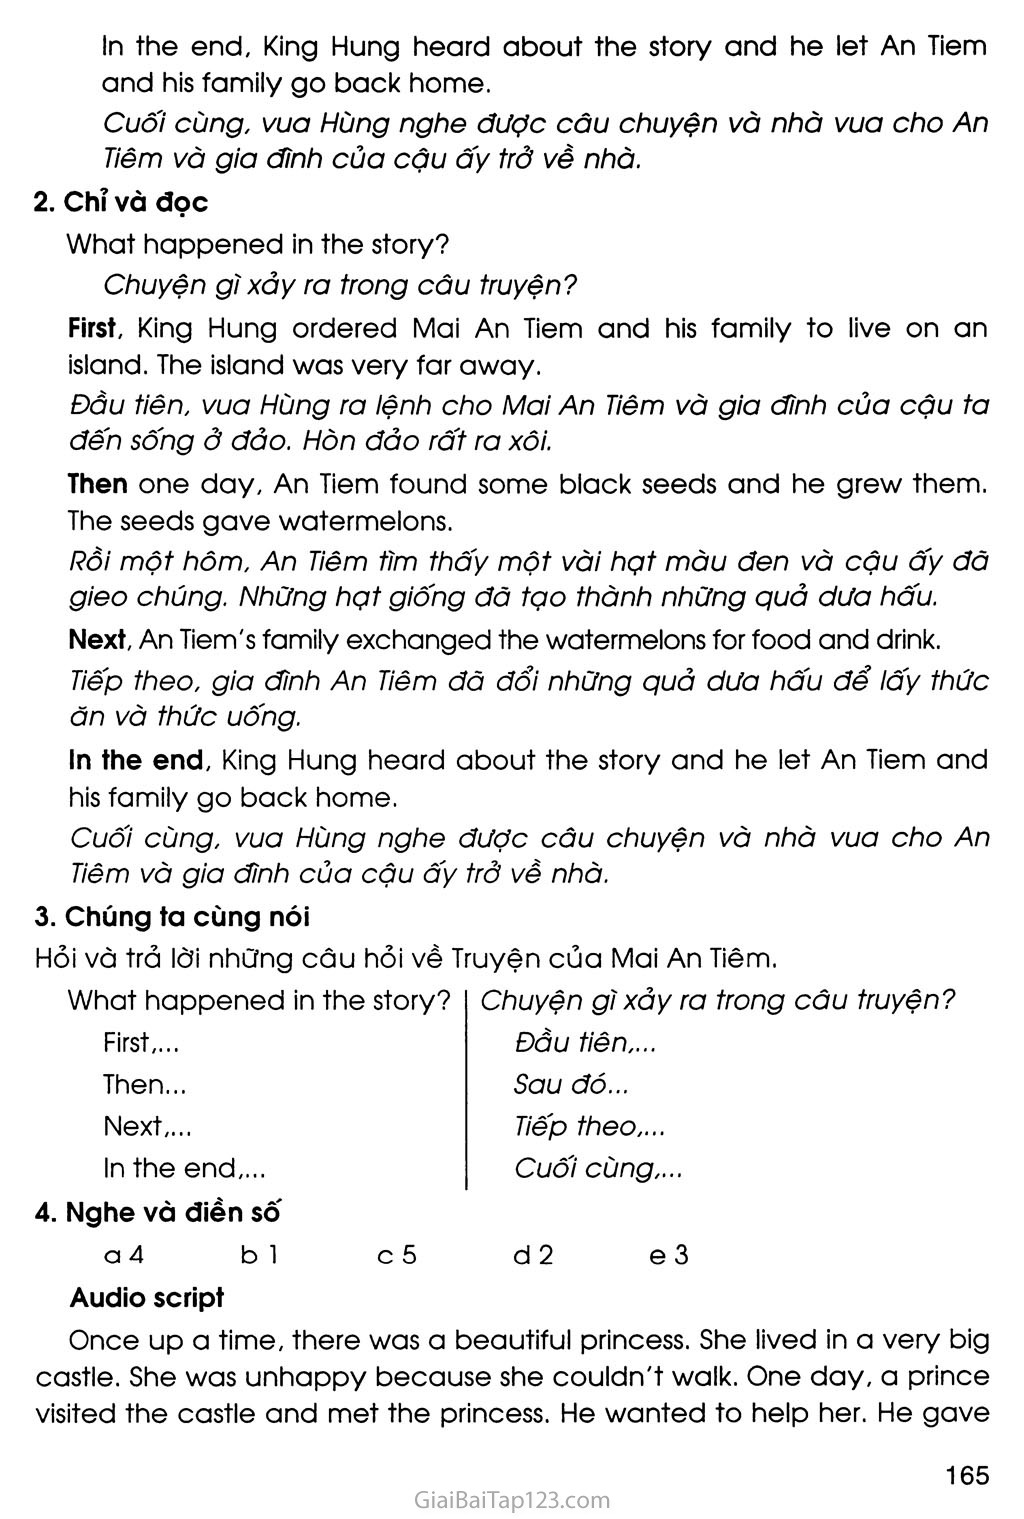 UNIT 14: WHAT HAPPENED IN THE STORY? trang 5